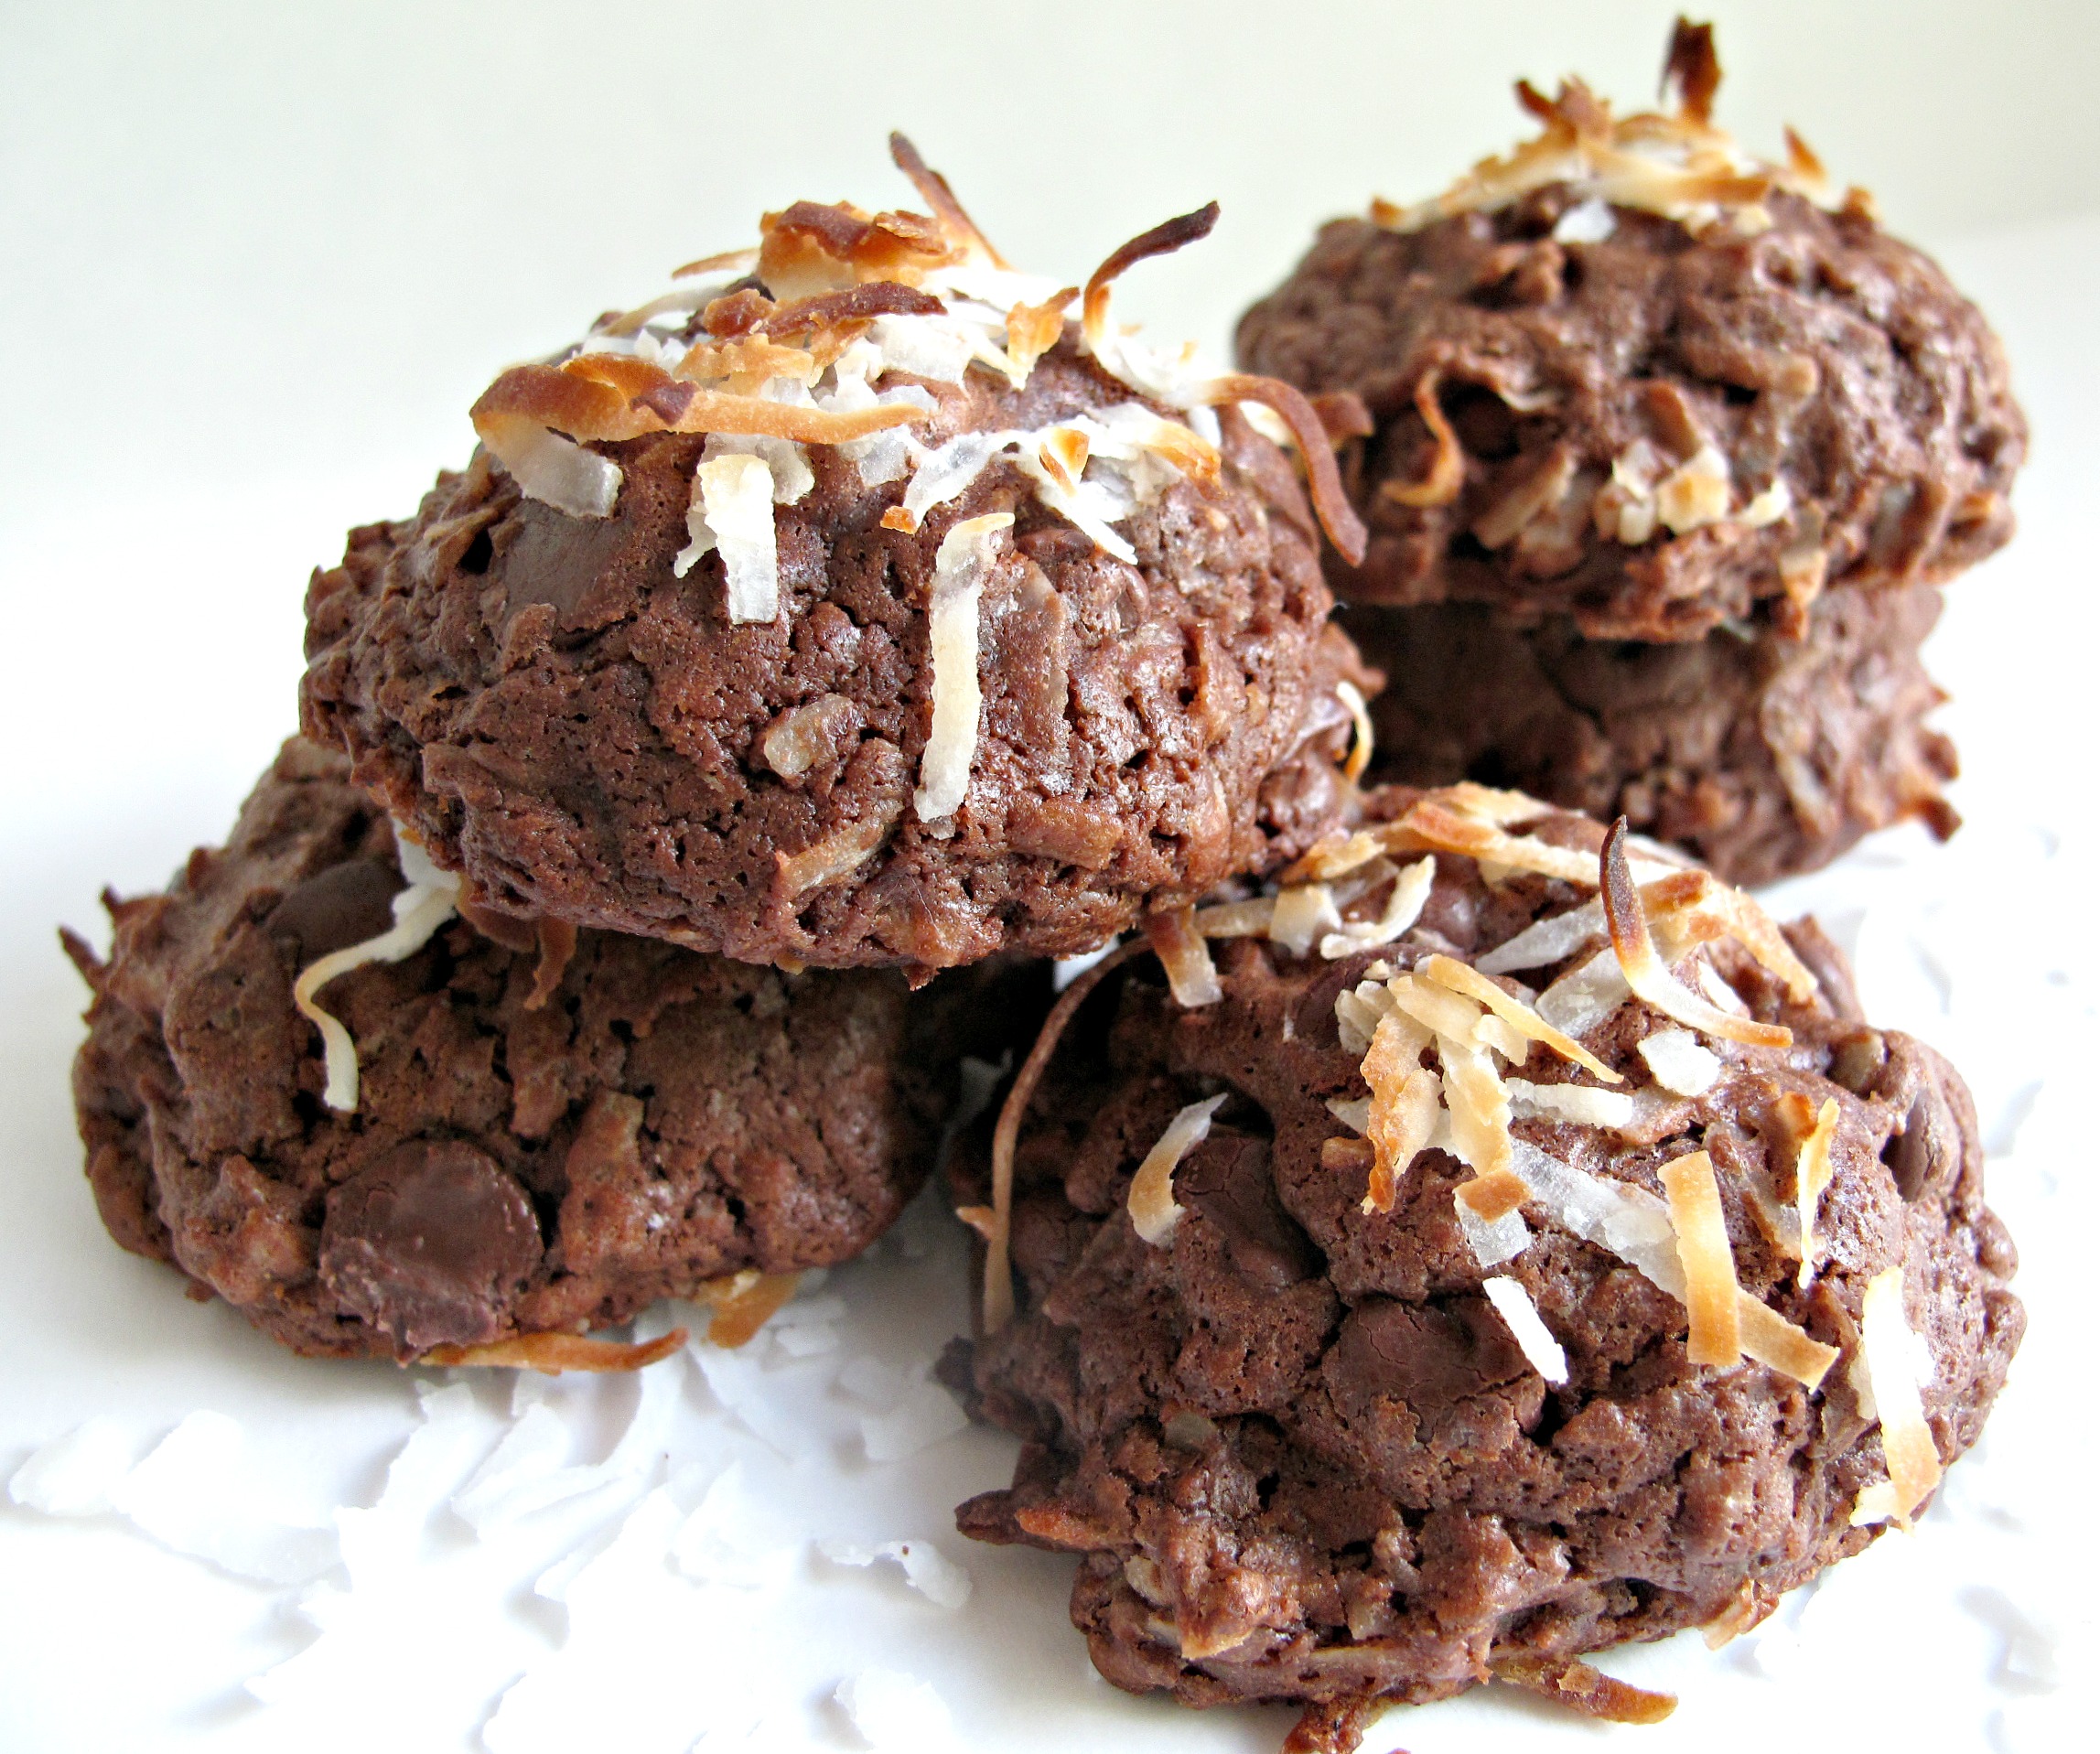 Chocolate Coconut Bliss Cookies topped with browned coconut.